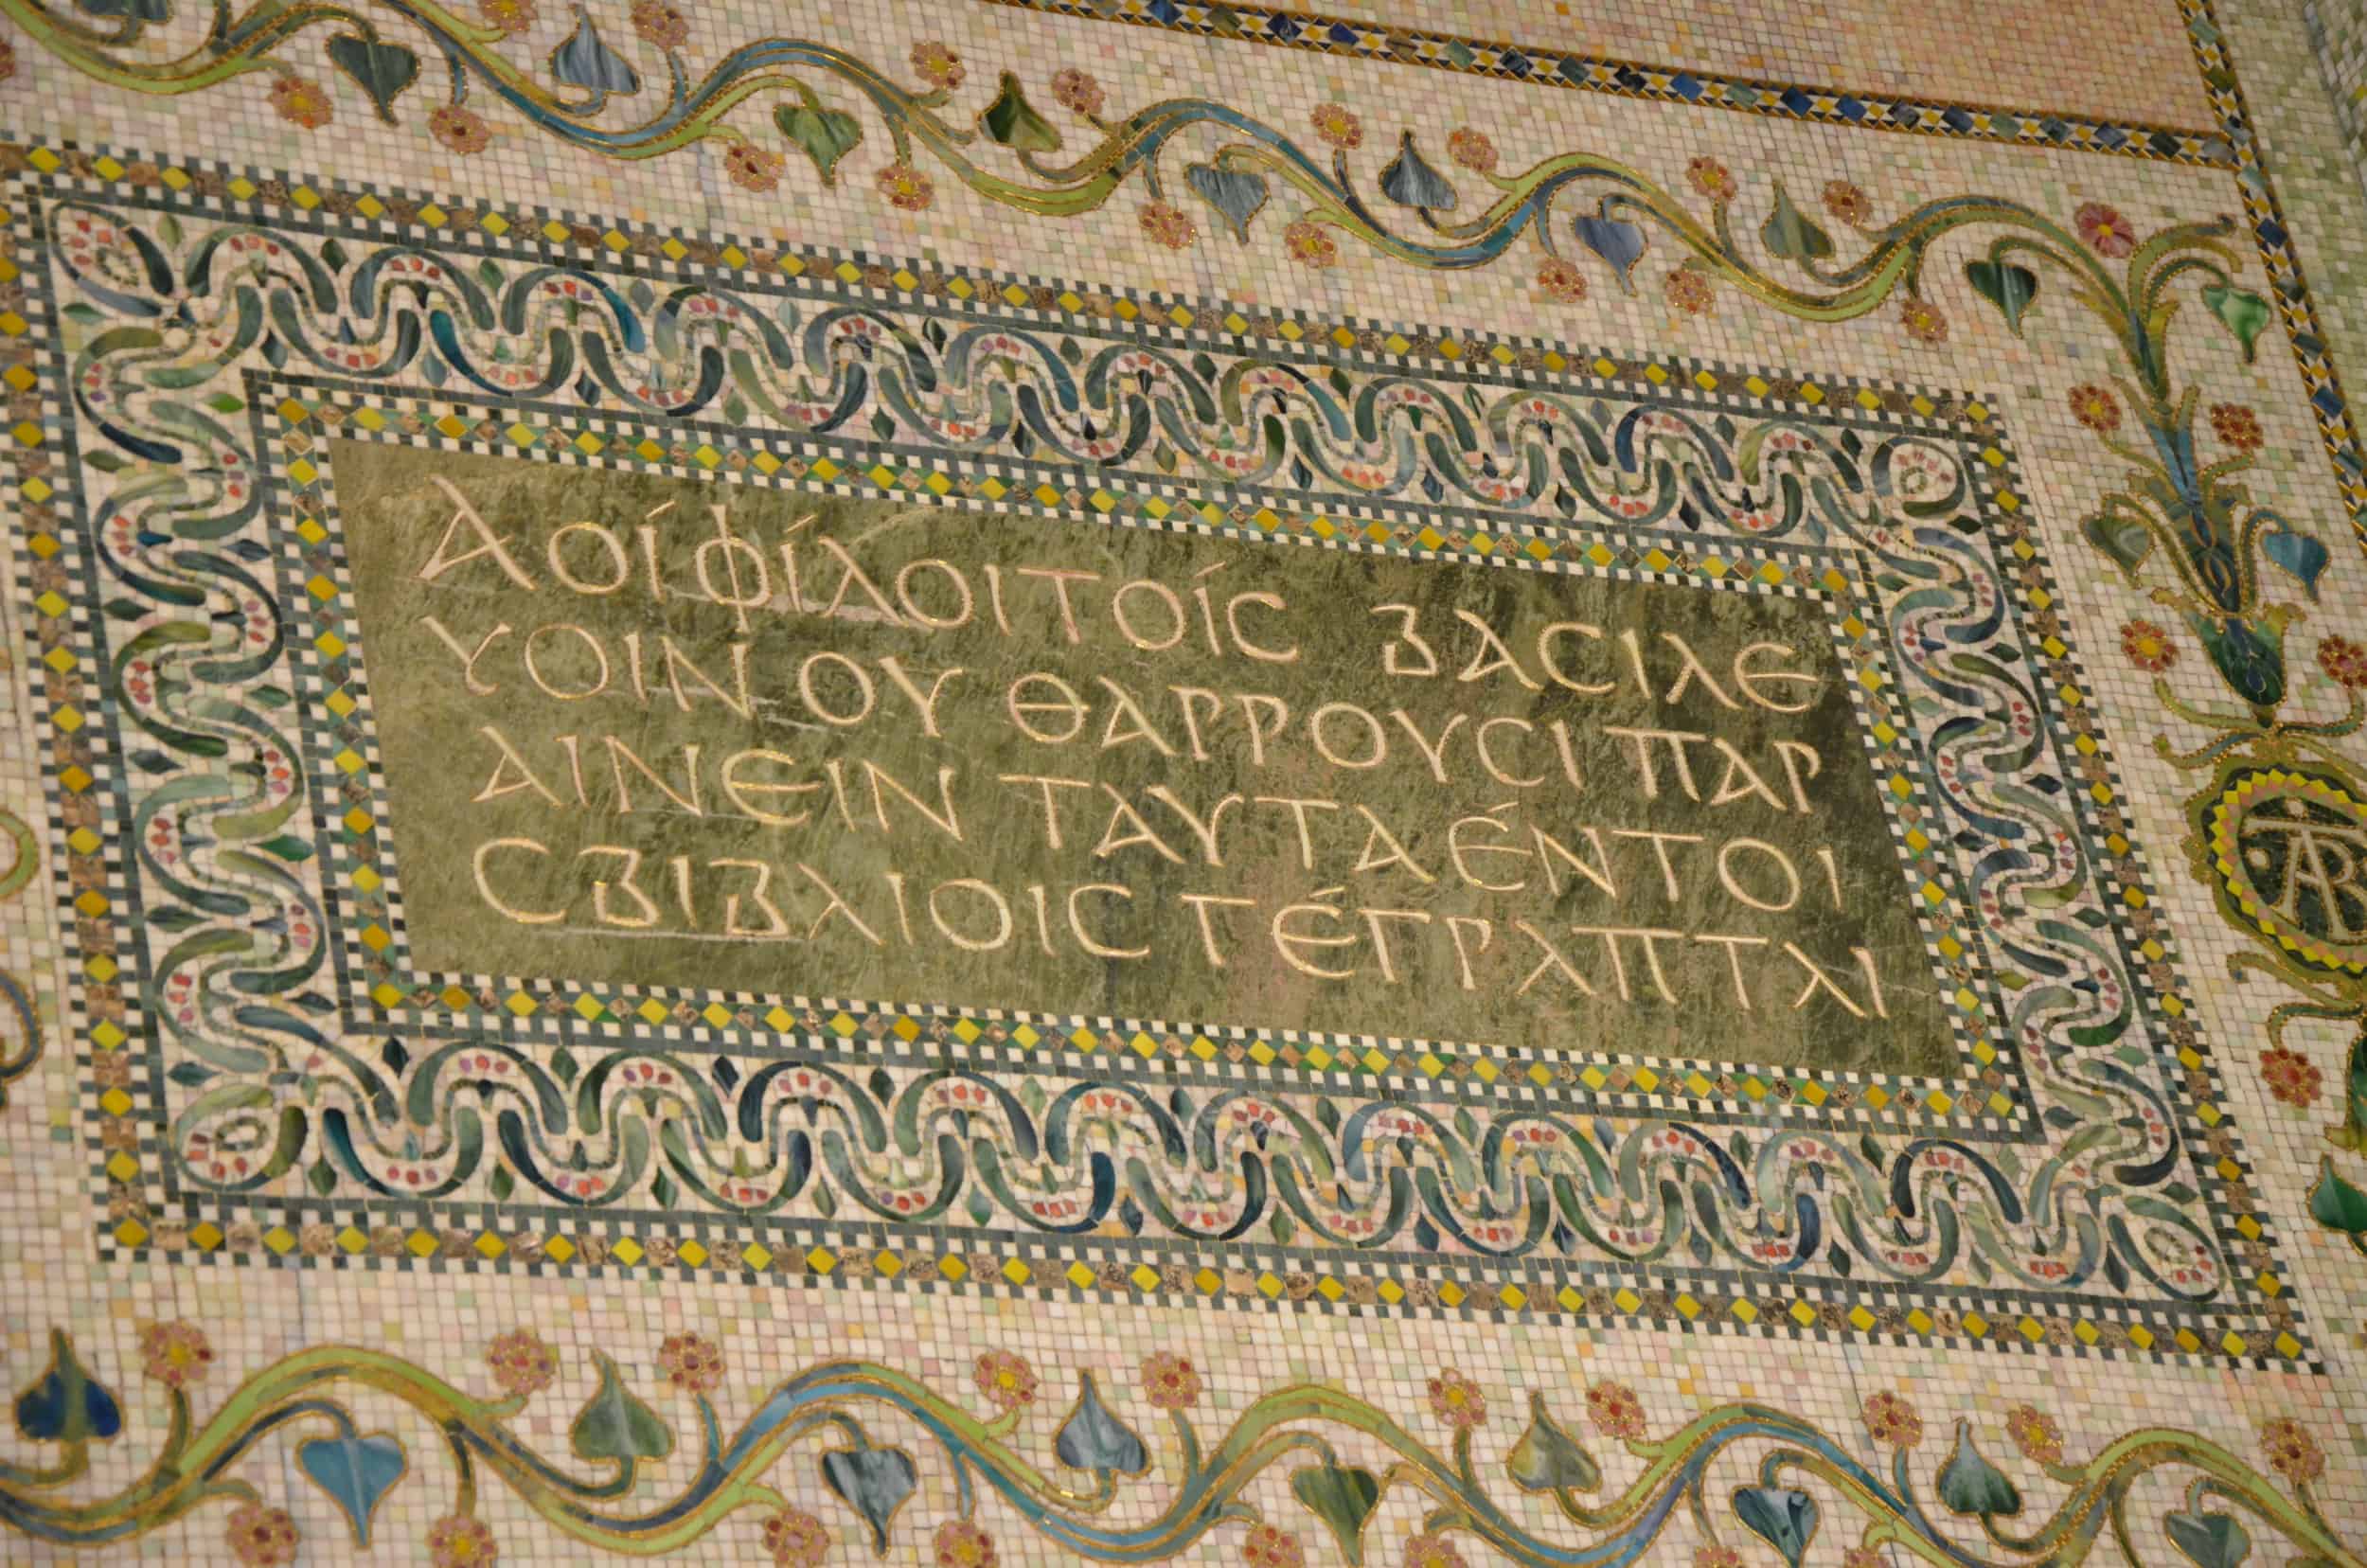 Mosaic pattern with a quote in Greek at the Preston Bradley Hall at the Chicago Cultural Center in Chicago, Illinois